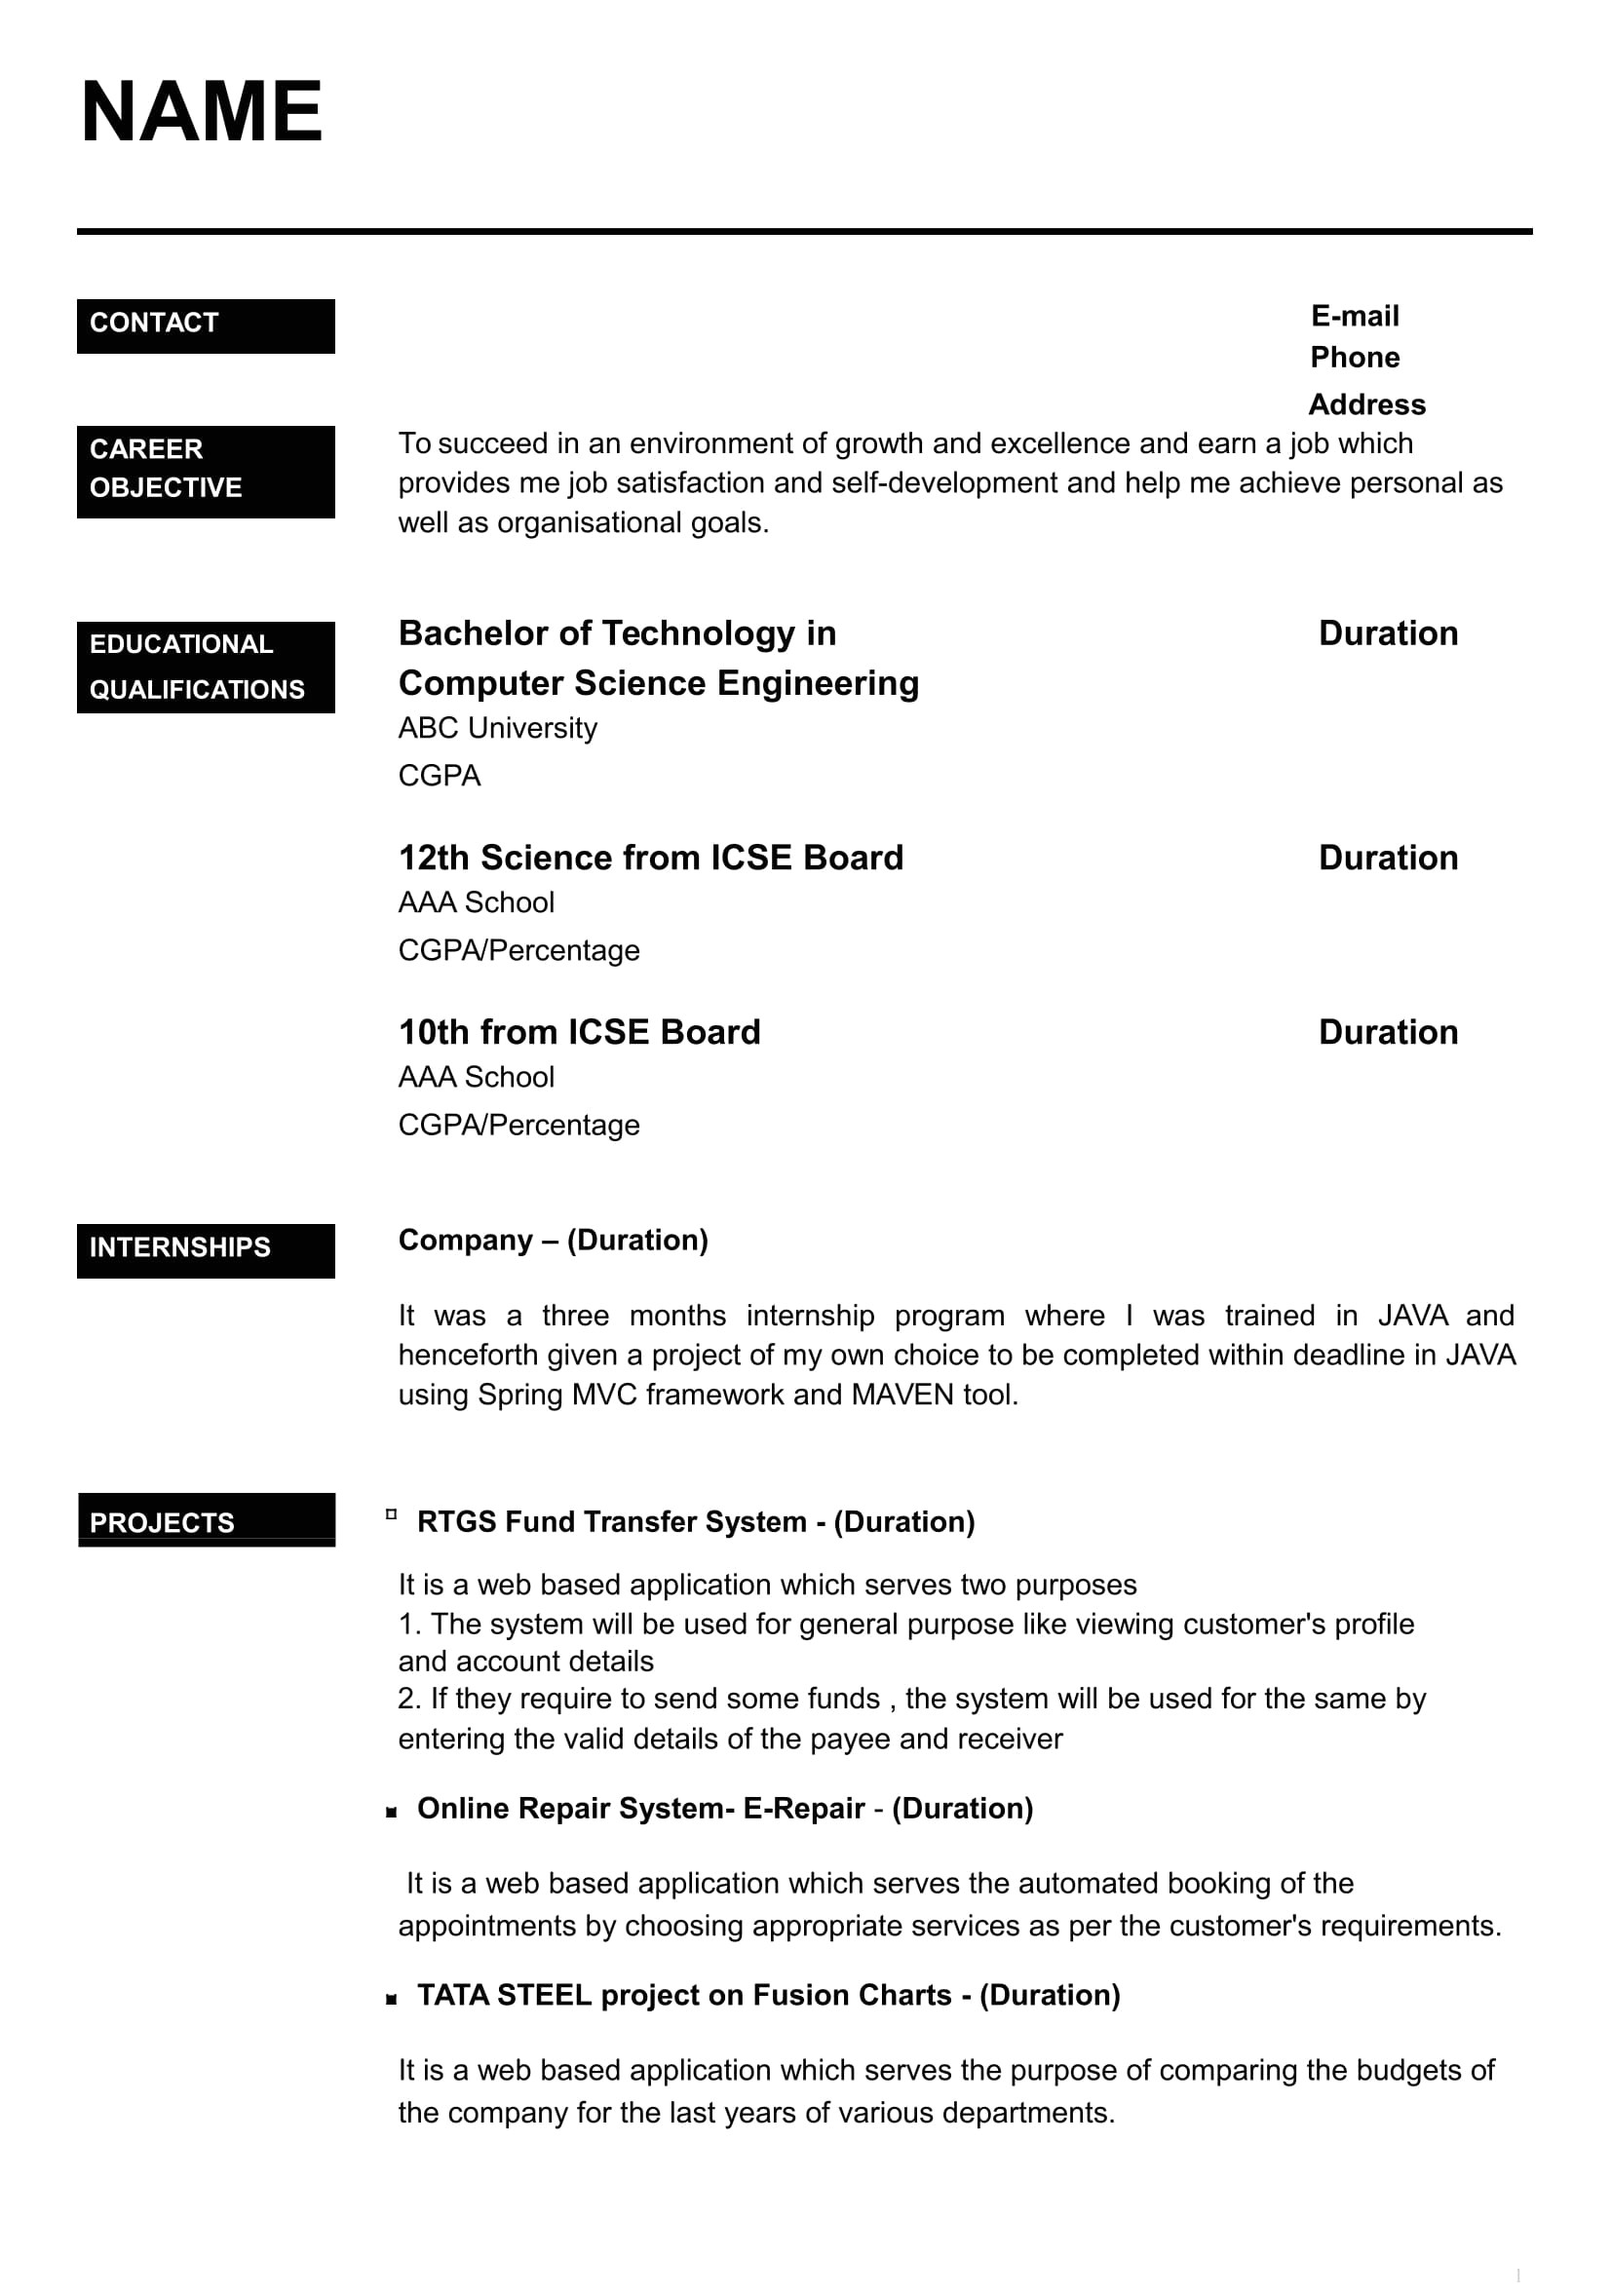 Sample Resume format for Freshers 32 Resume Templates for Freshers Download Free Word format